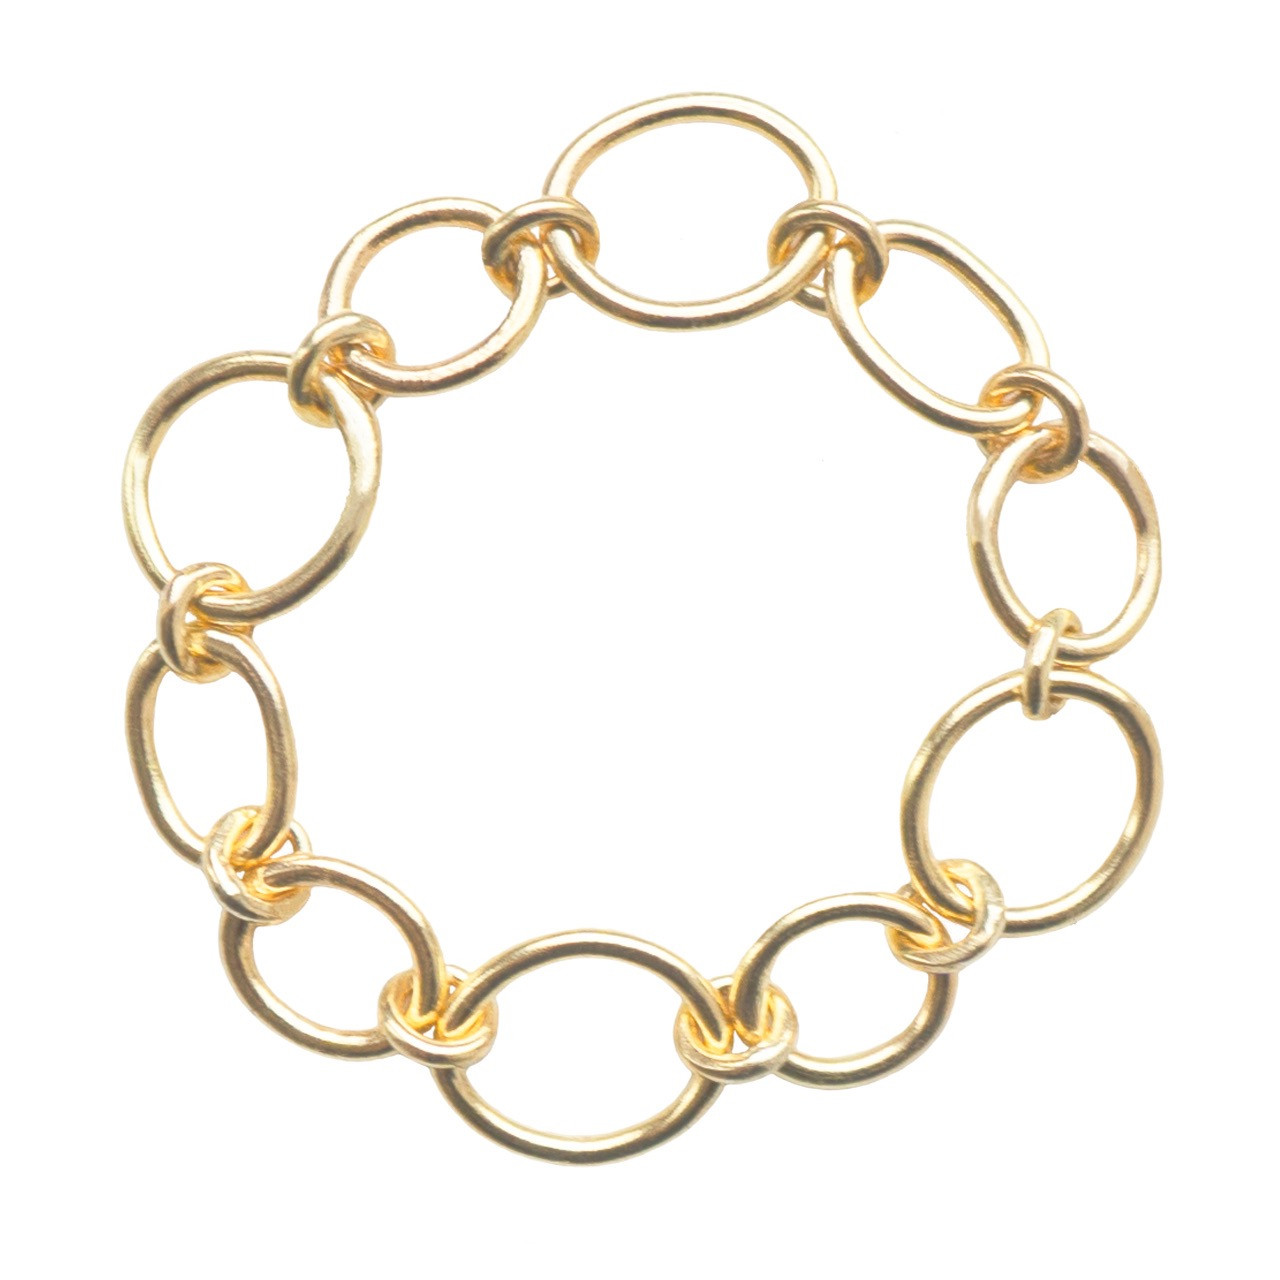 Litica 18ct Gold Chain Ring, Maria Manola, tomfoolery